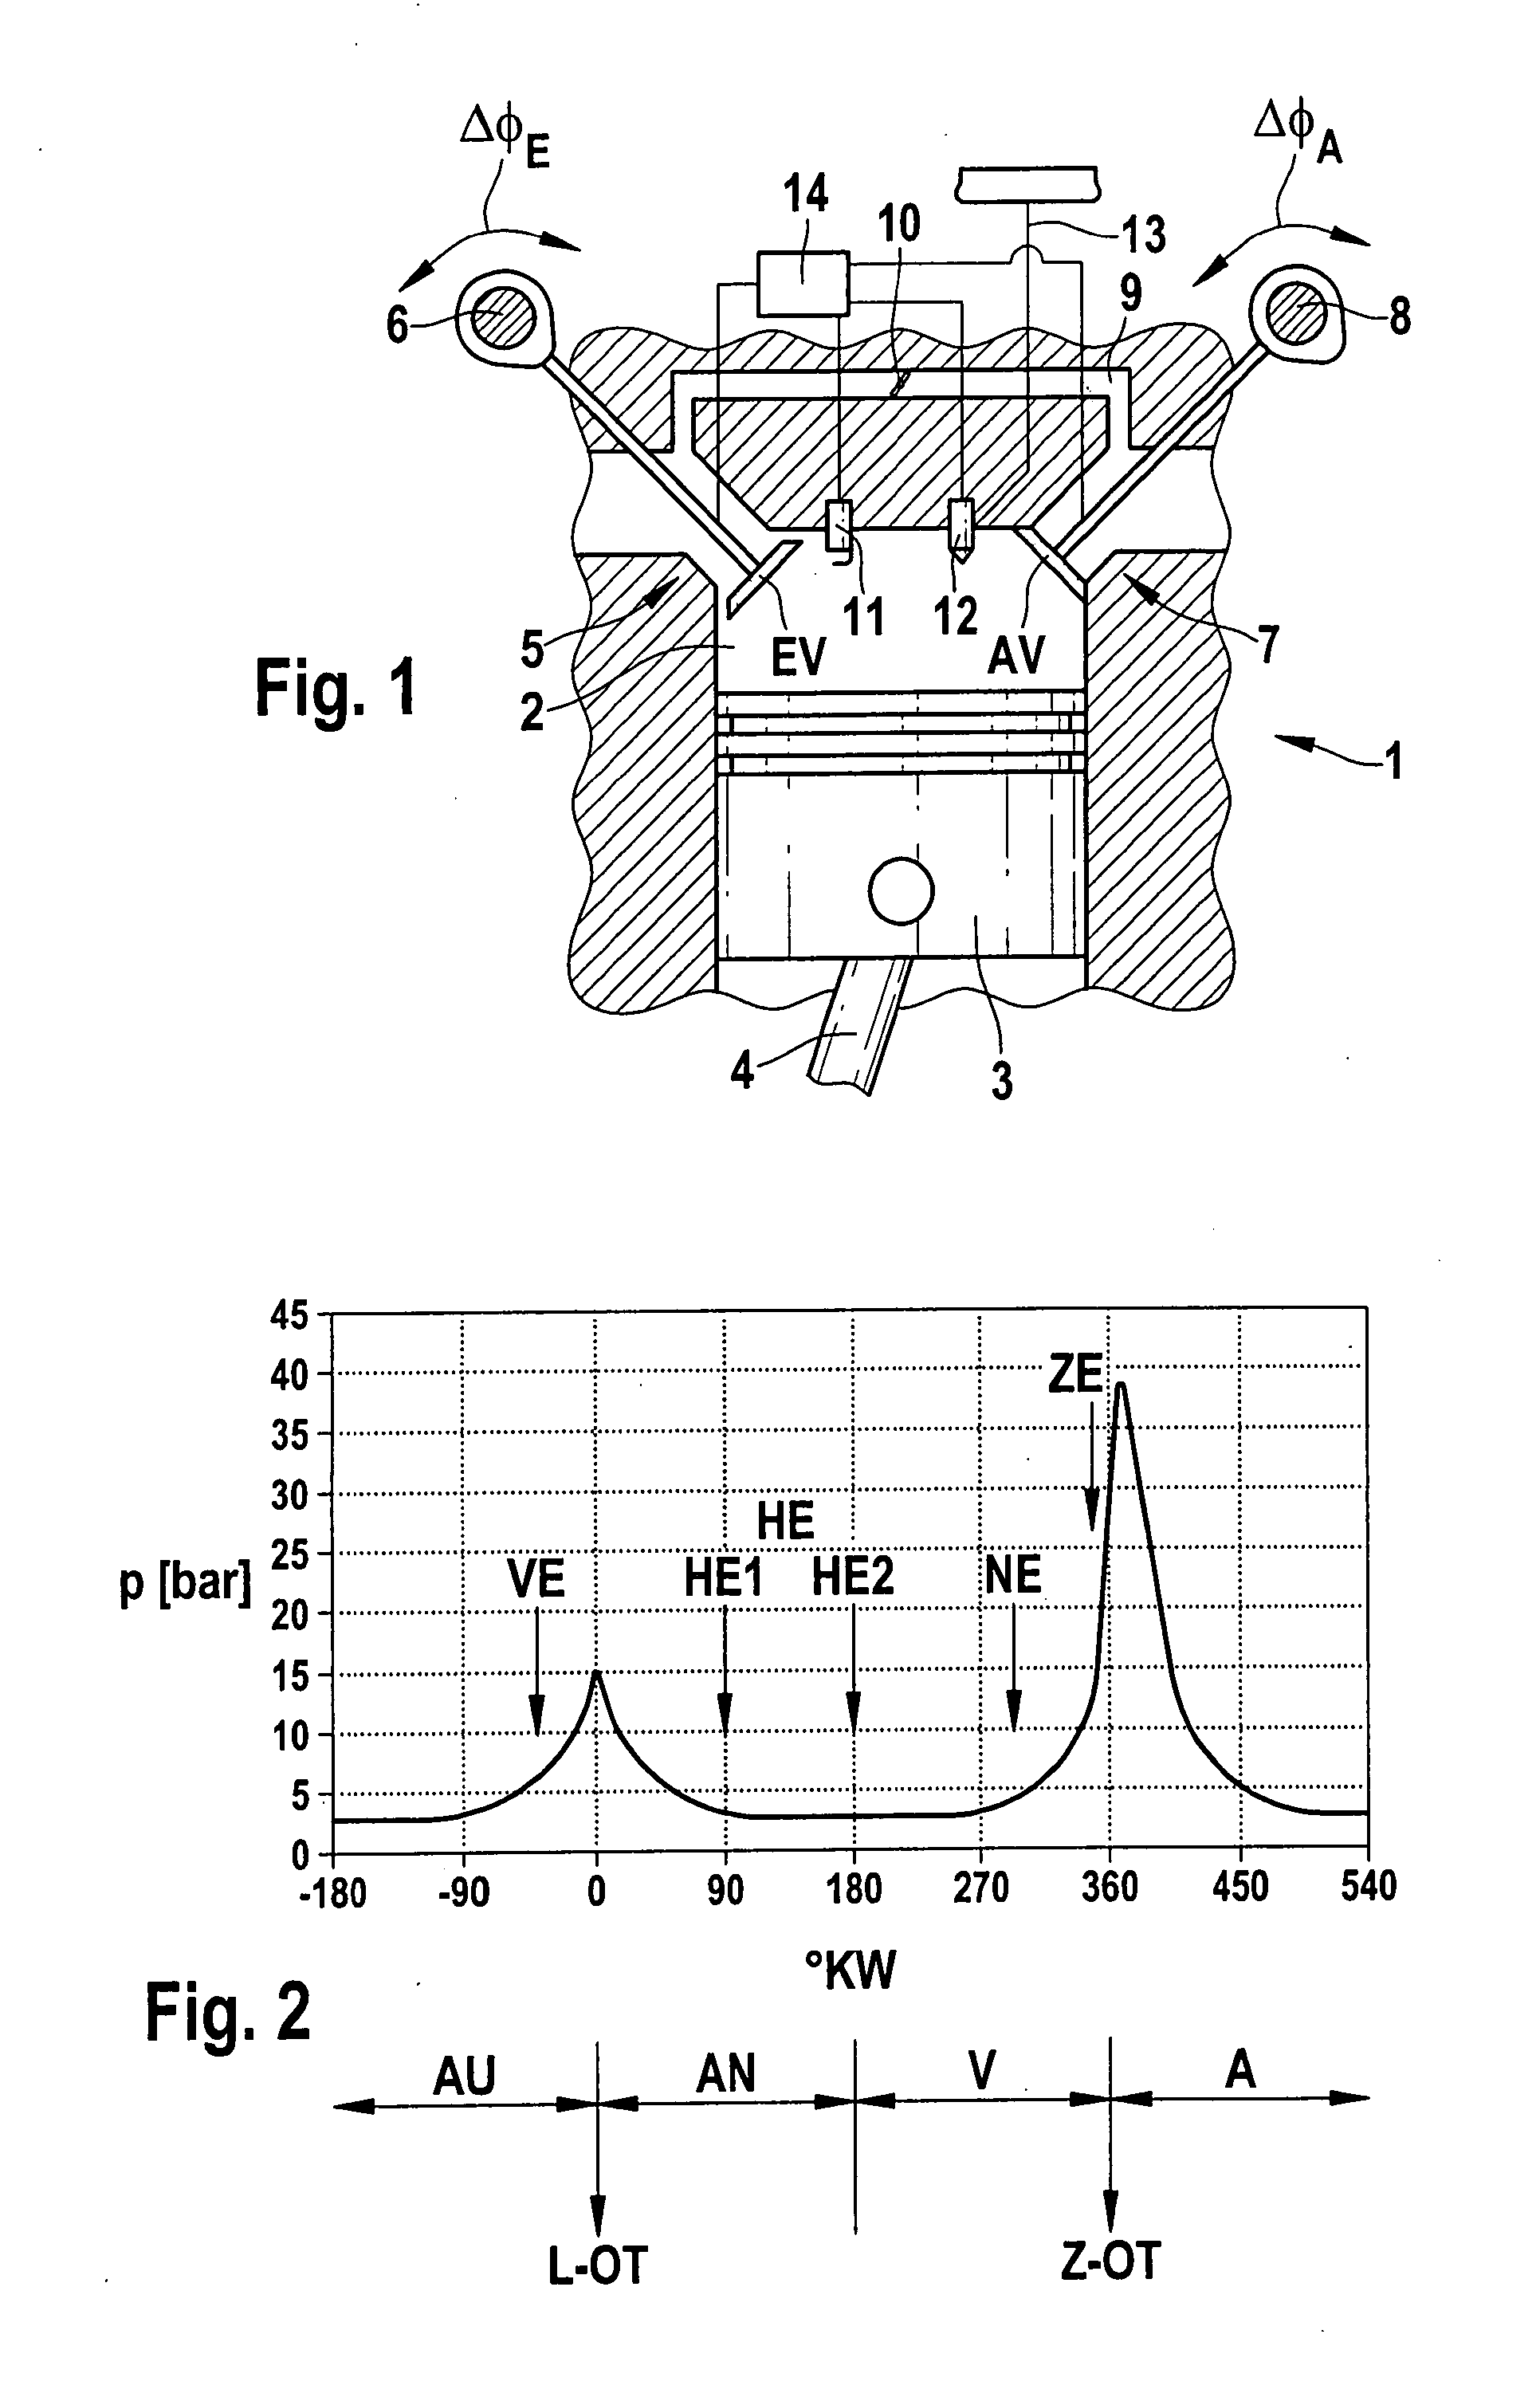 Procedure for the operation of an internal combustion engine